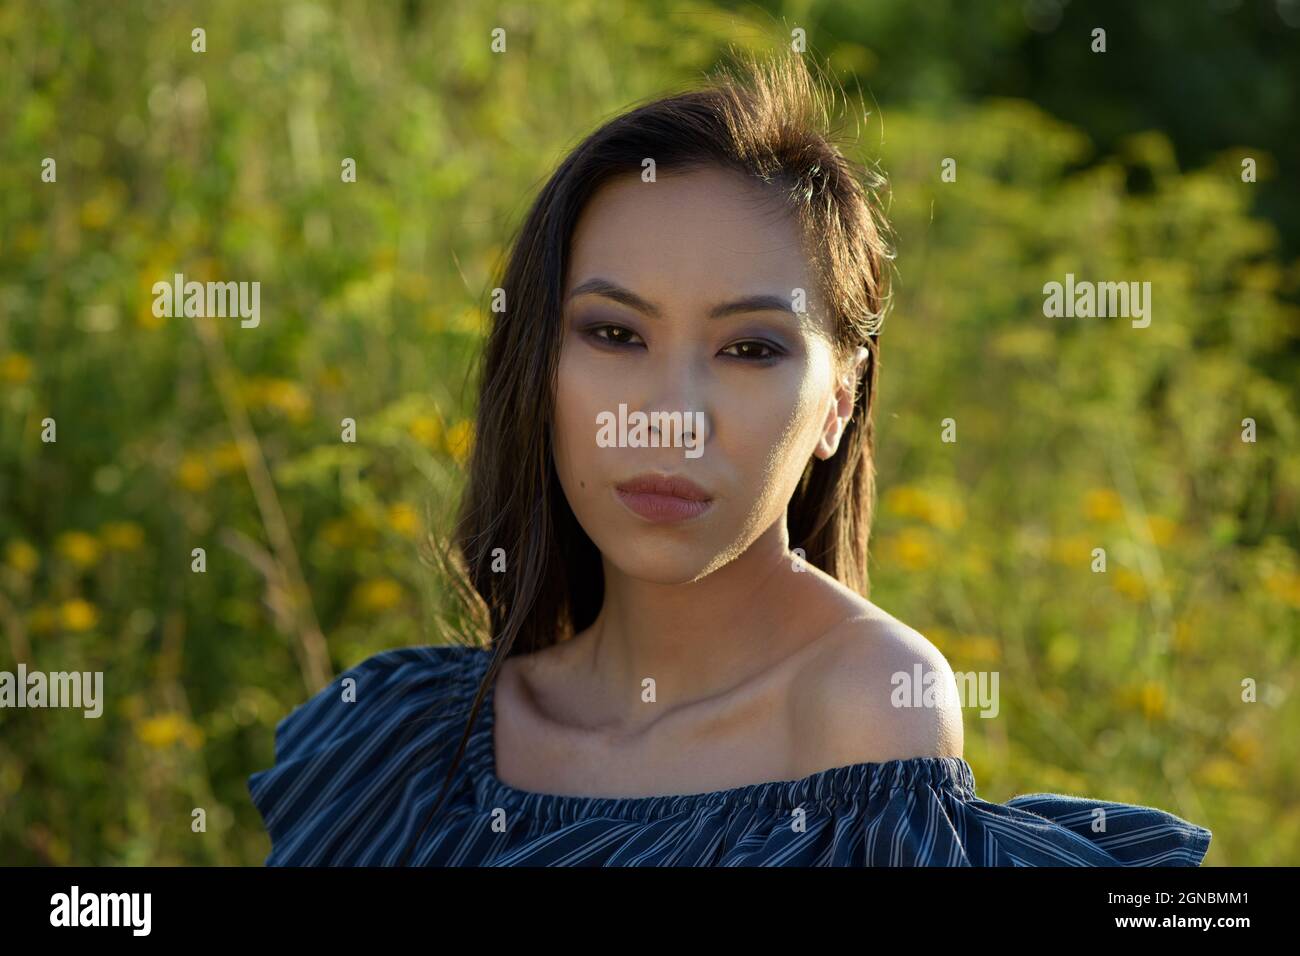 Sunny portrait of young asian woman Stock Photo